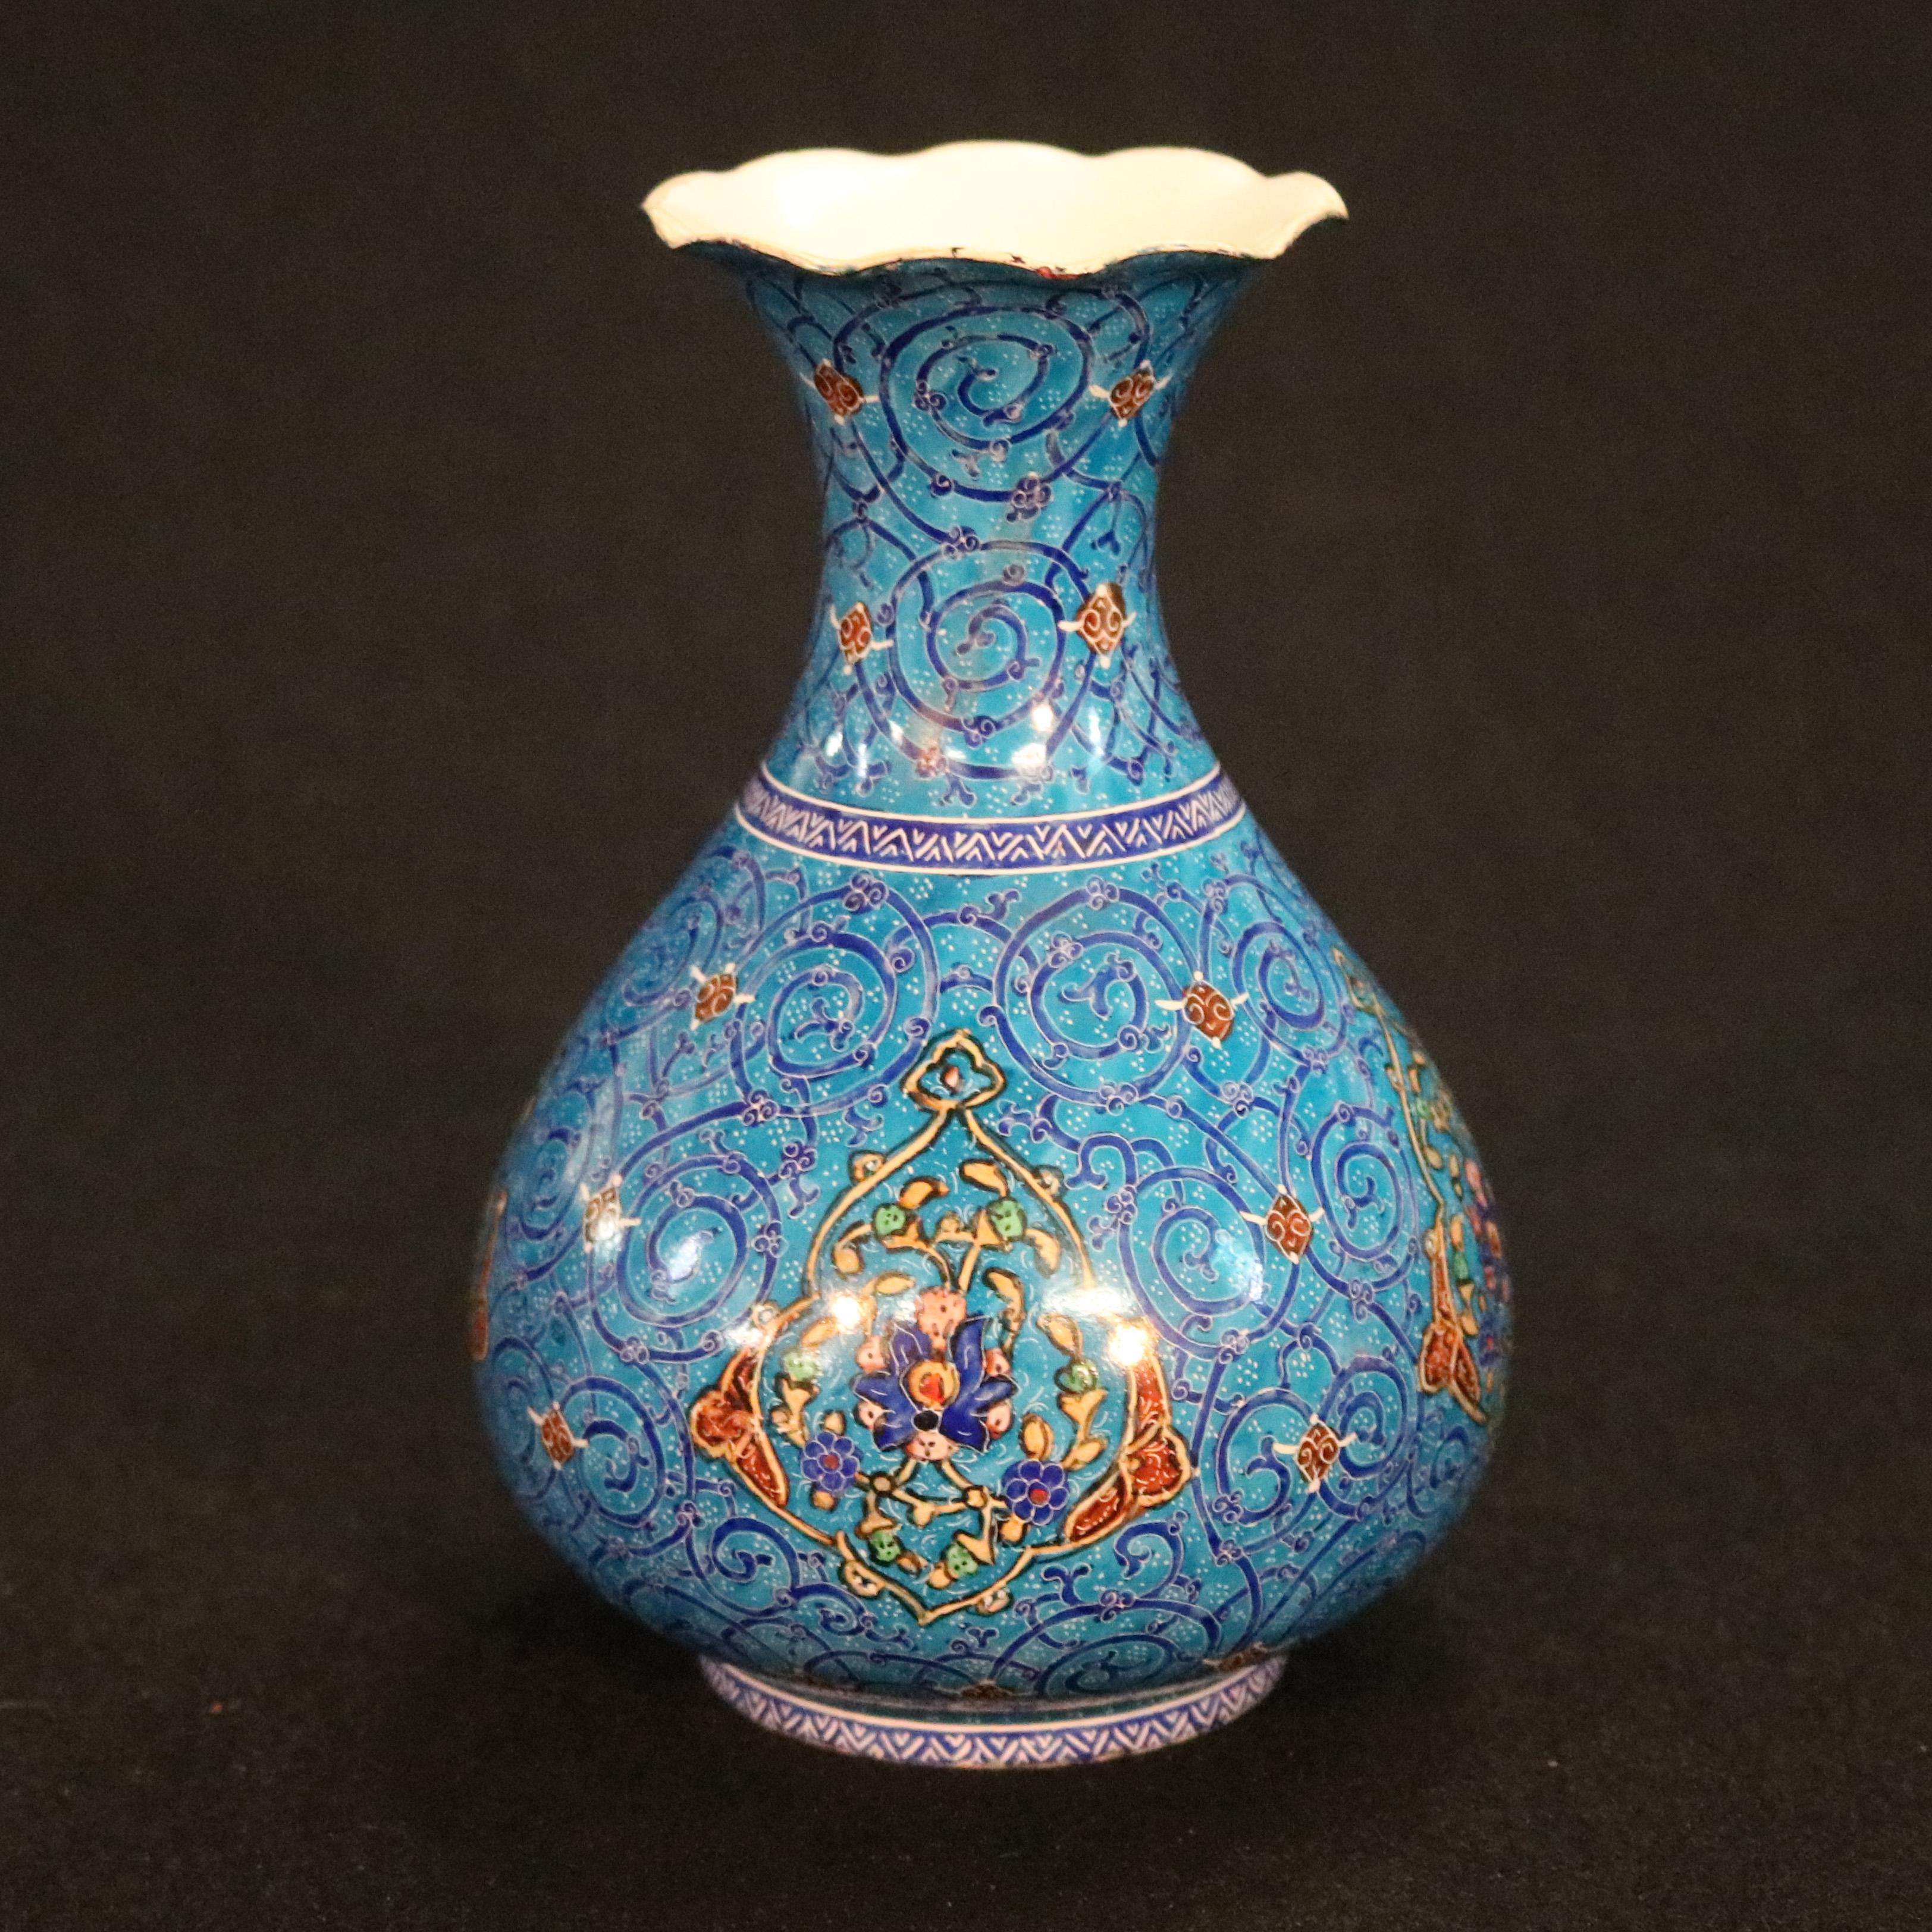 An antique Moorish vase offers metal construction with bulbous base and ruffled rim, hand enameled with all-over intricate scroll and foliate design, reserve with Persian elements, Artist-signed on base in Farci as photographed, circa